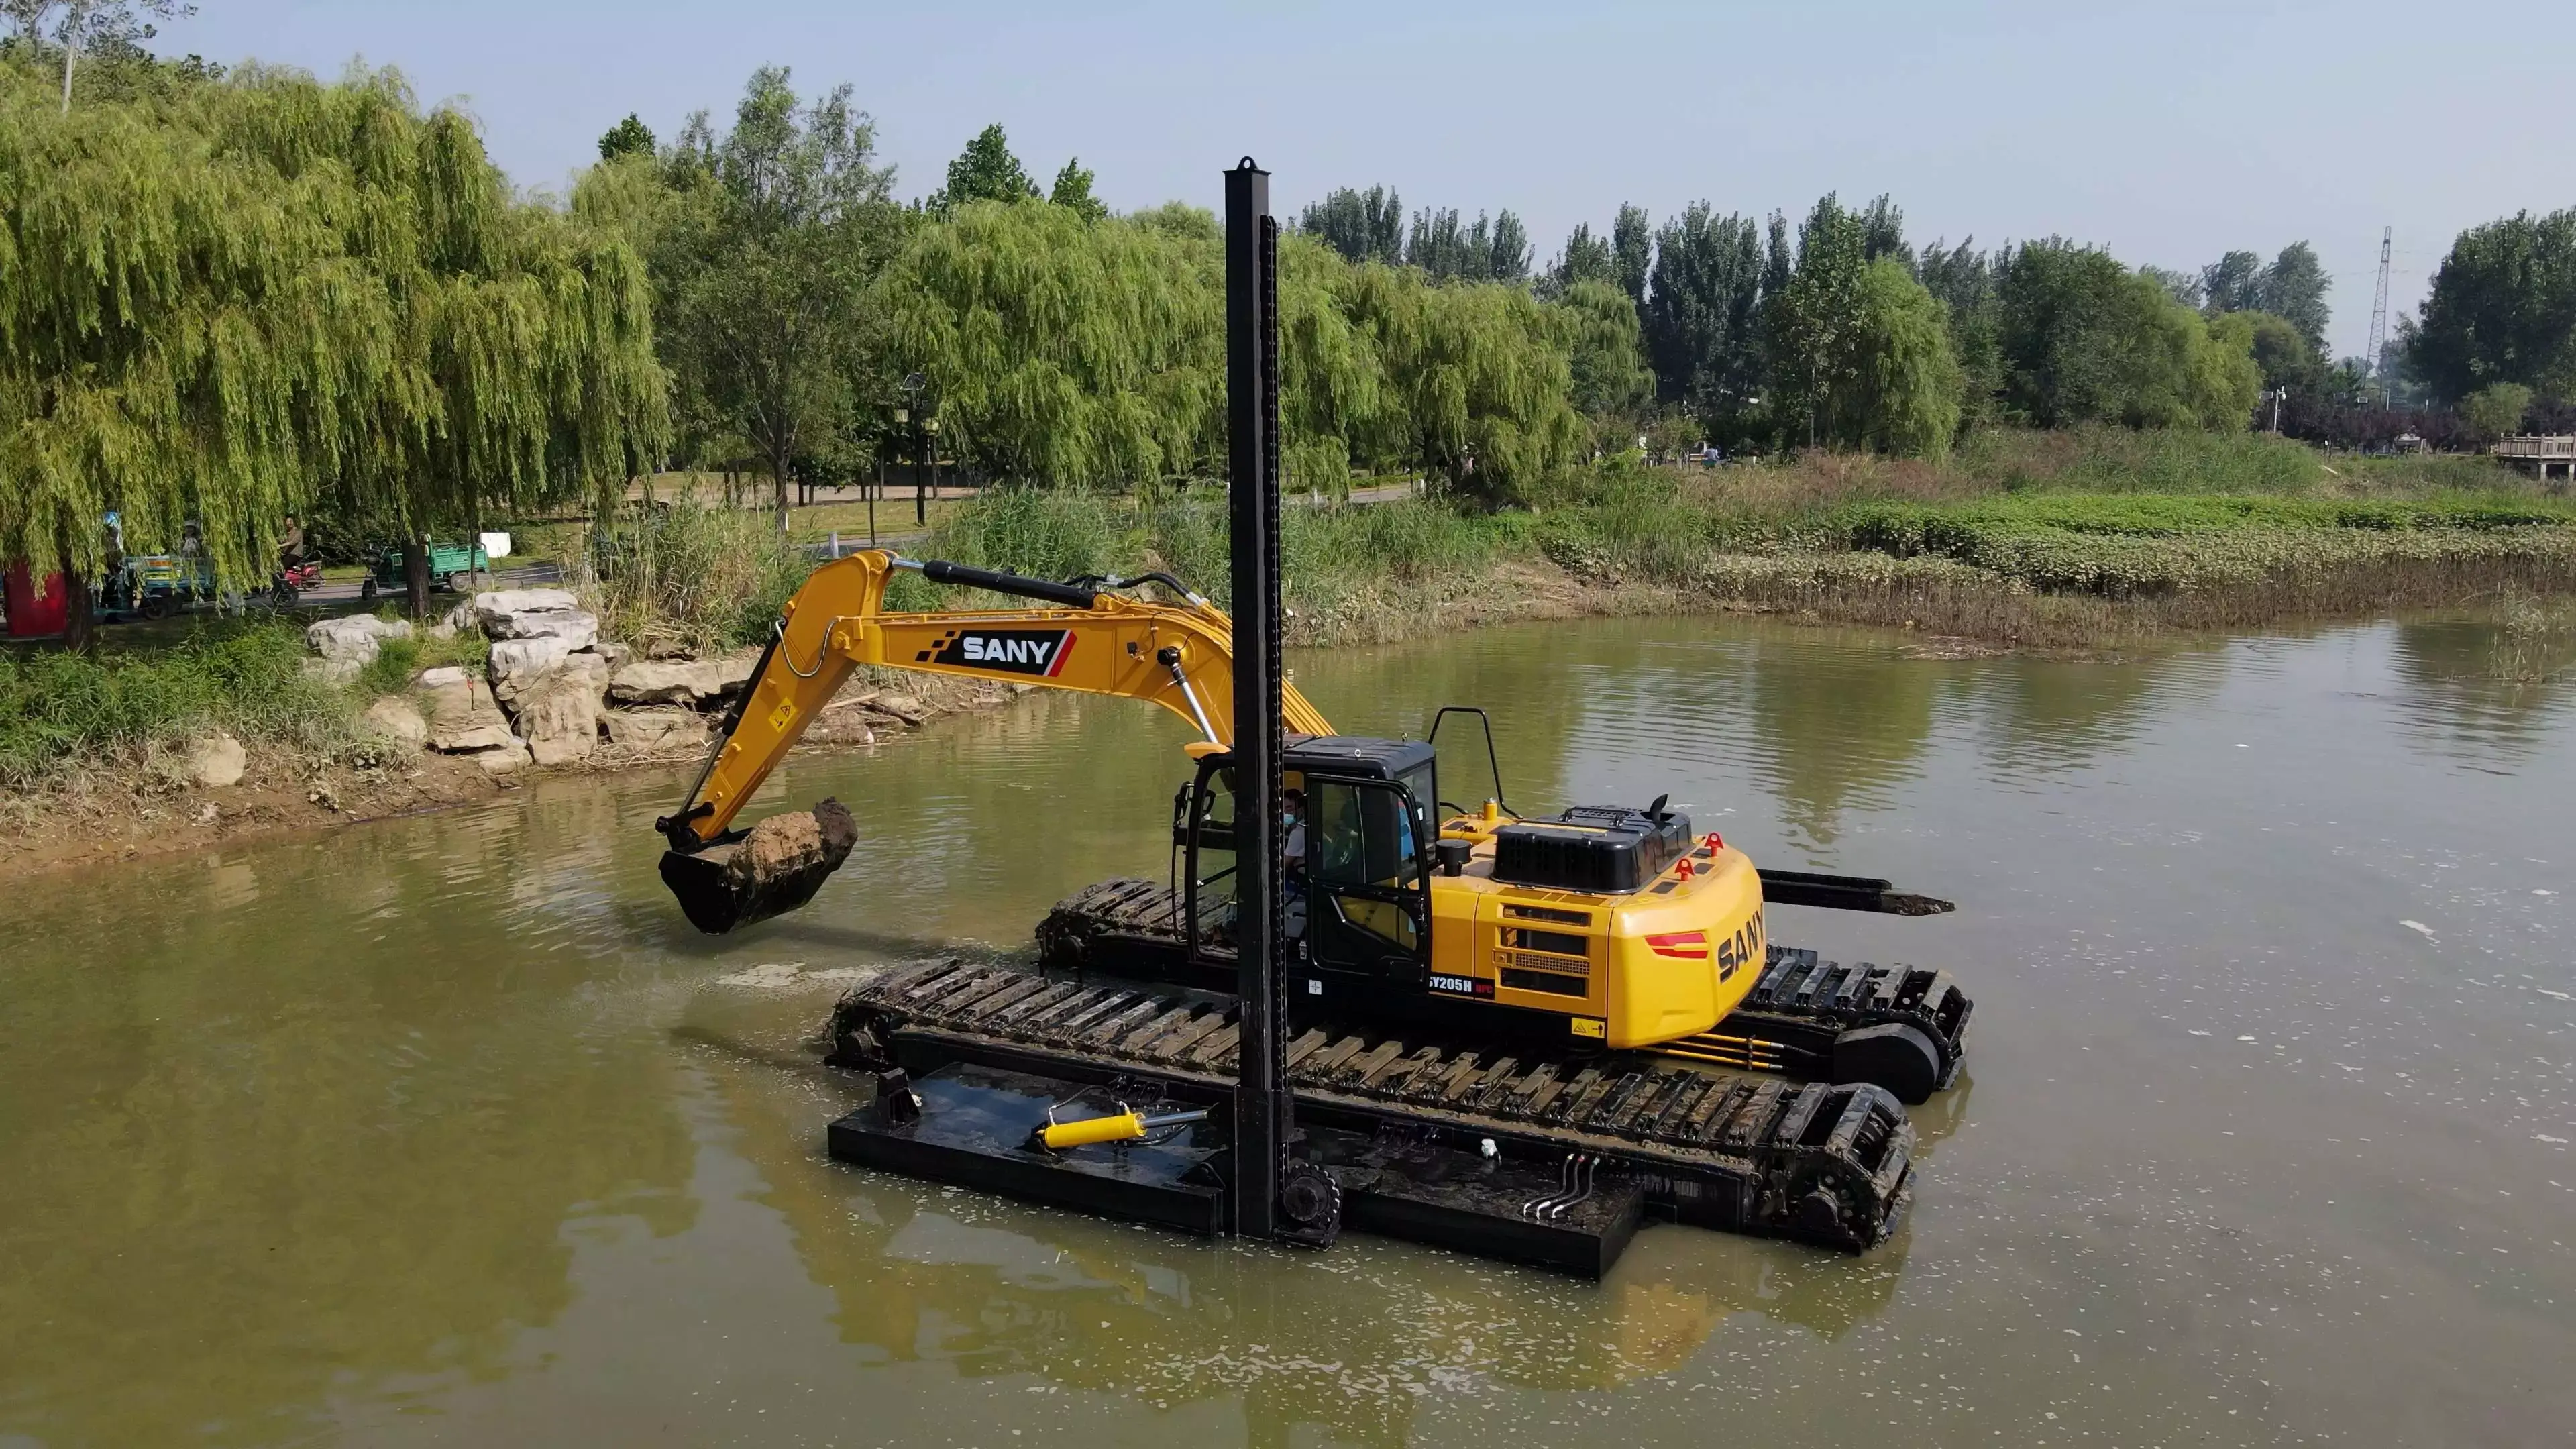 Amphibious tracked excavator allow operators to work easily on water and mud.